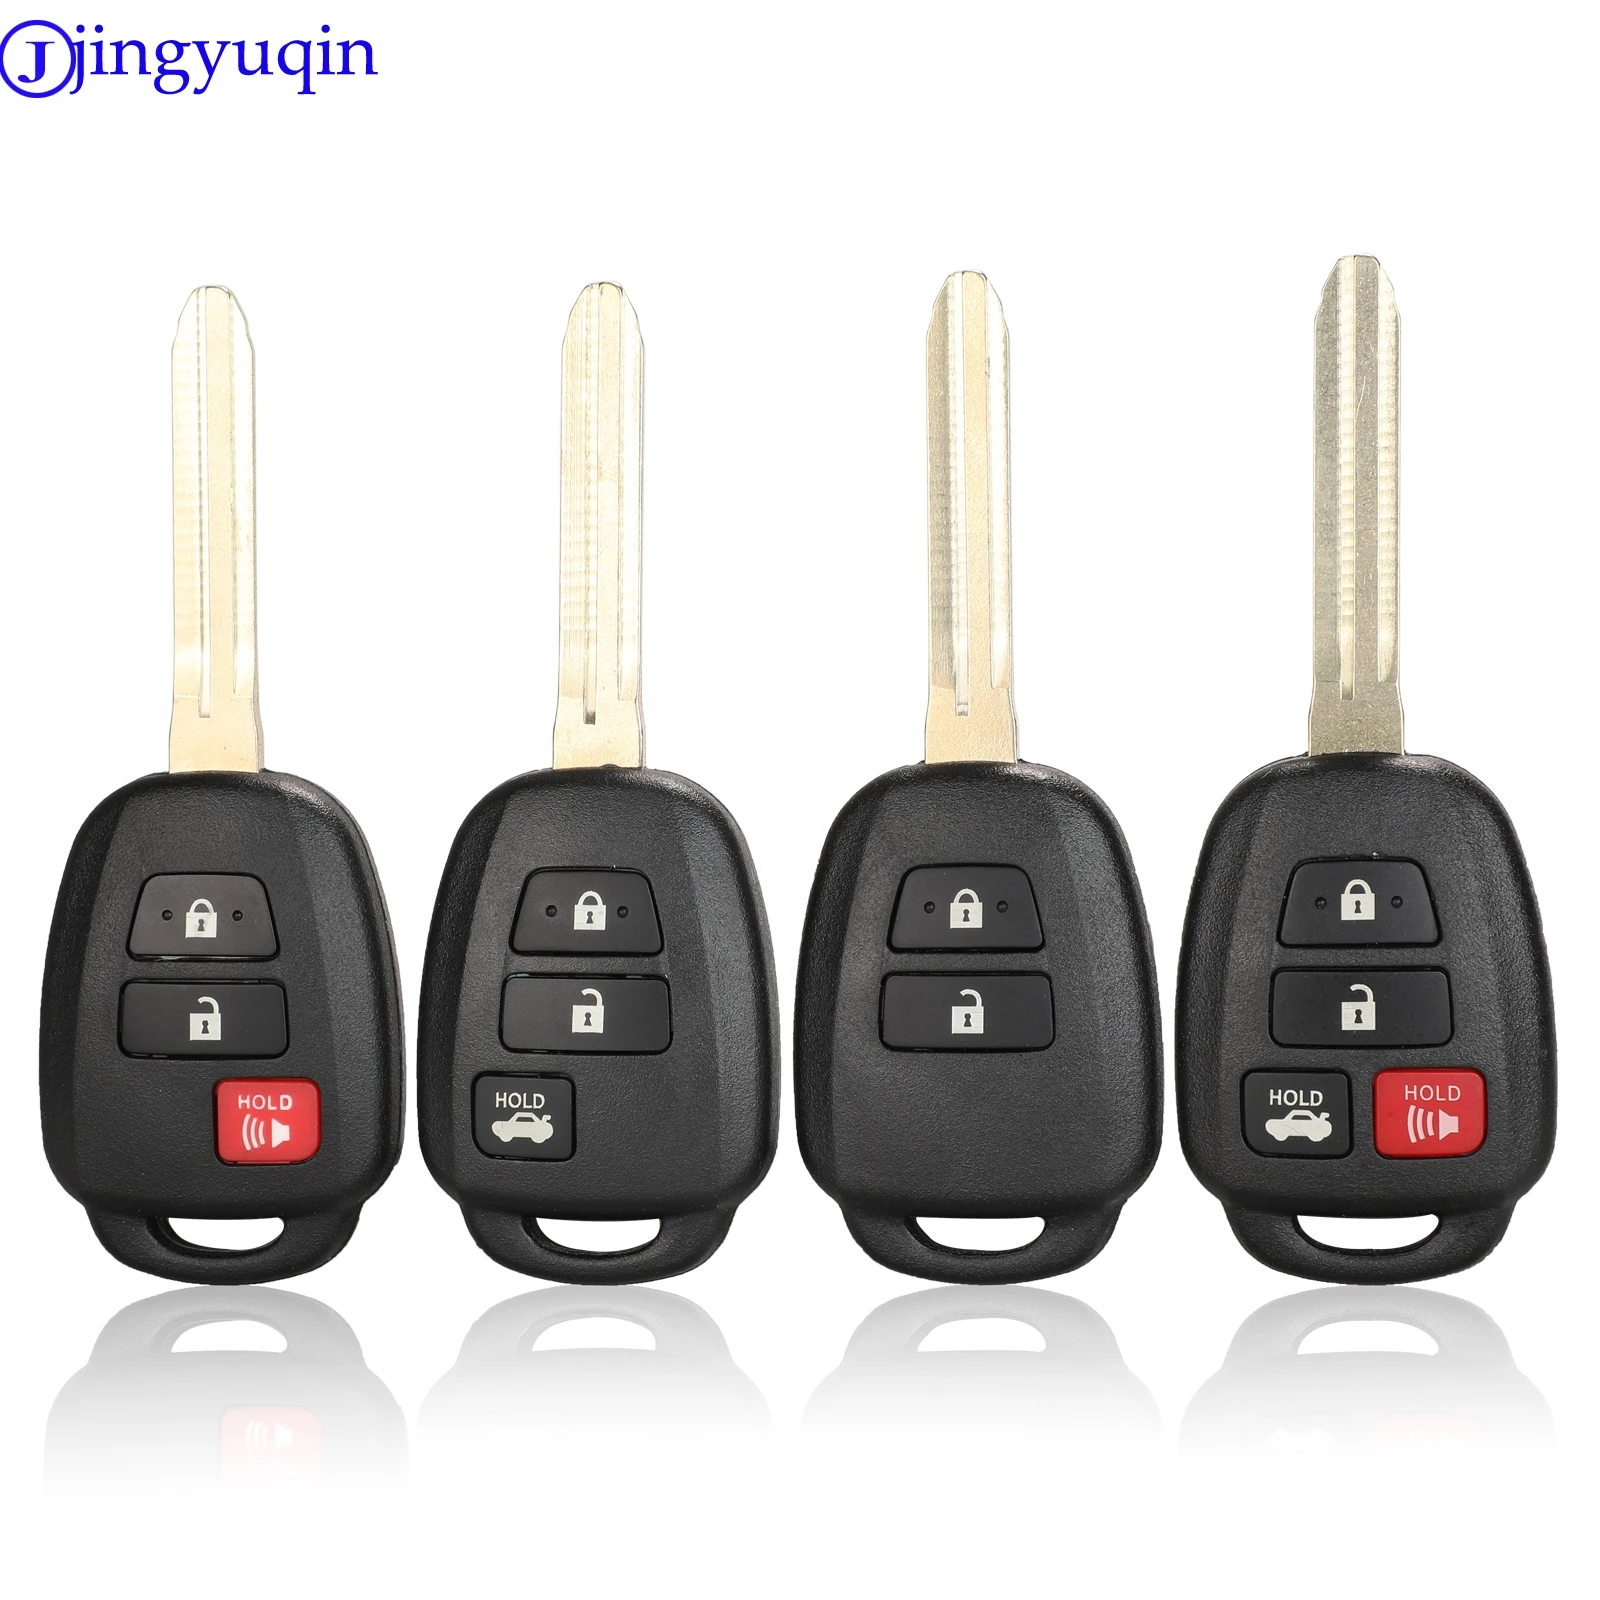 jingyuqin 10ps For Toyota CAMRY 2012 2013 2014 2015 Corolla 2014 2015 4 Buttons Remote Car Key Shell Case Fob With TOY43 Blade